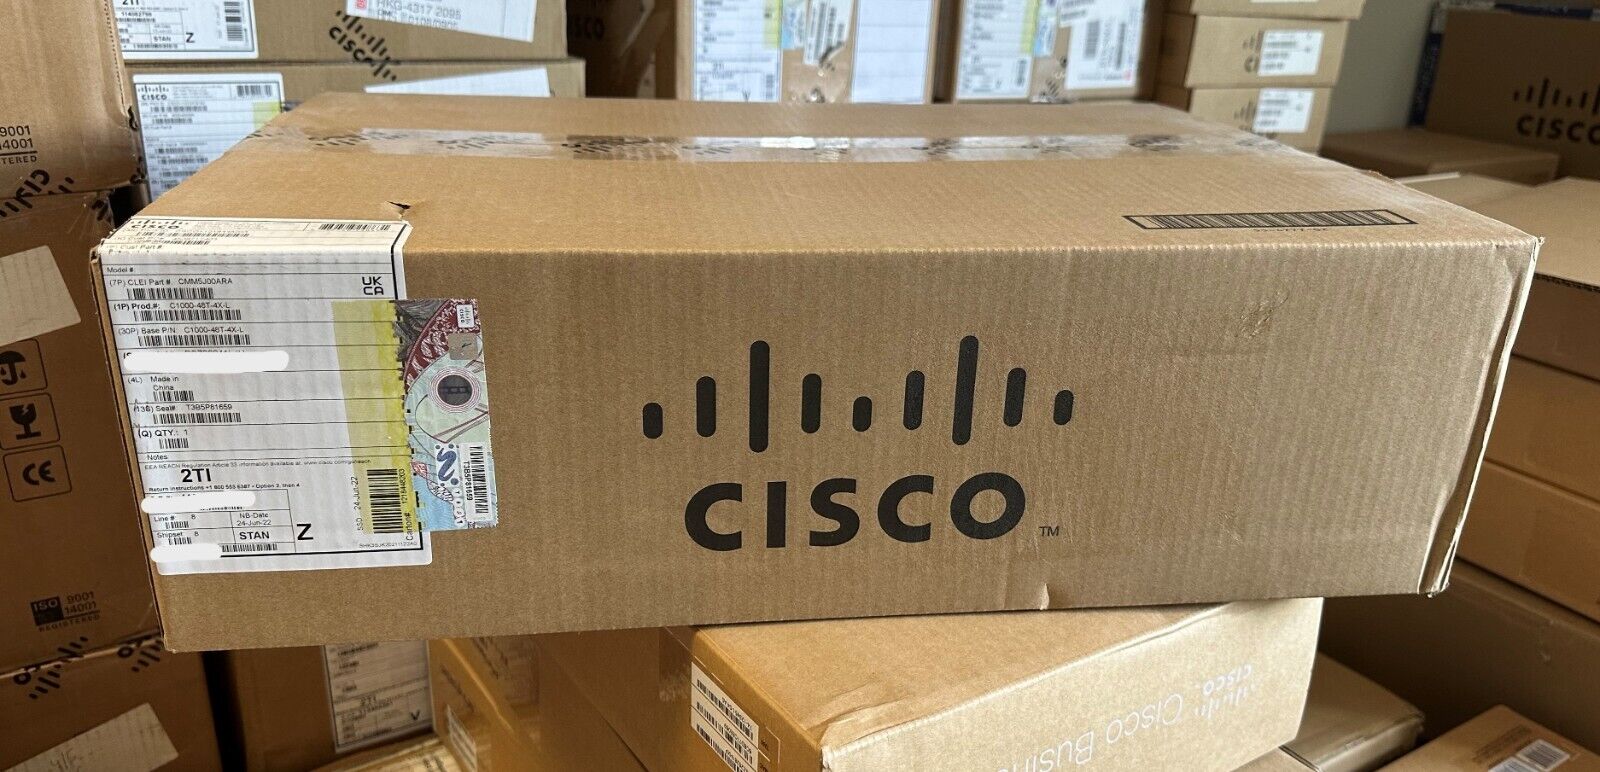 New Sealed Cisco C1000-48T-4X-L Catalyst 48 Ports Managed Switch